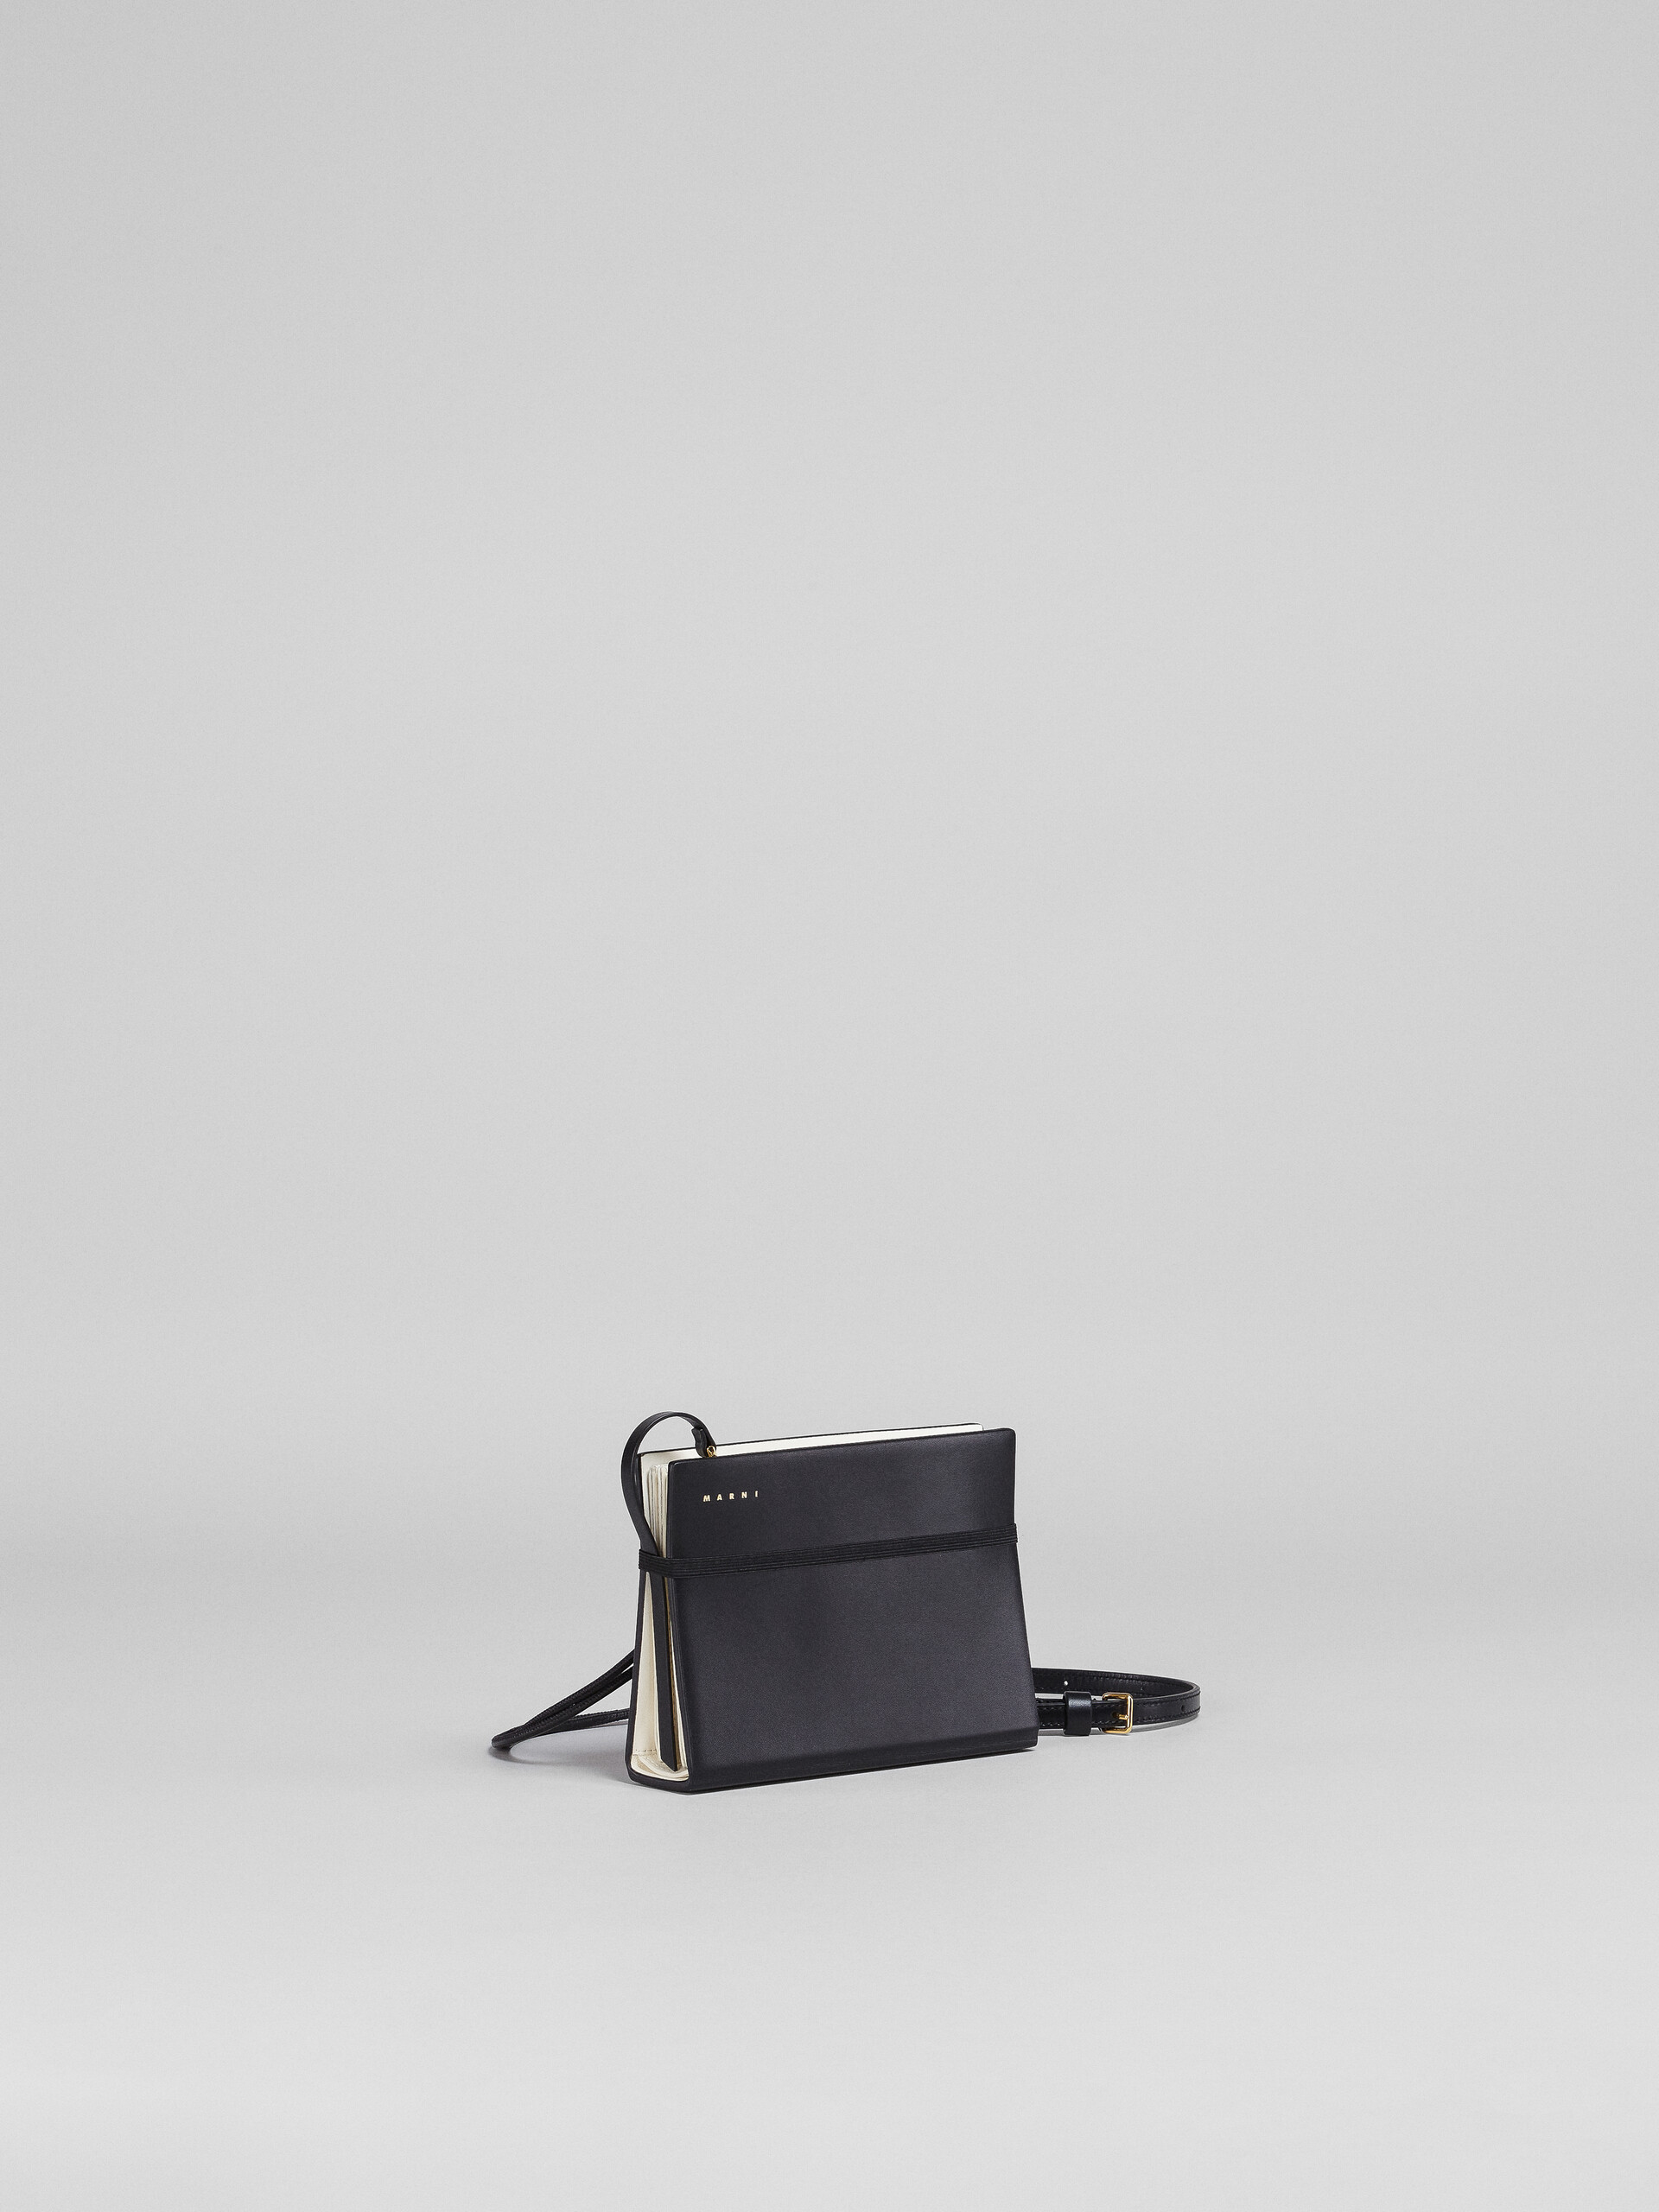 Black and white leather clutch - Beutel - Image 6